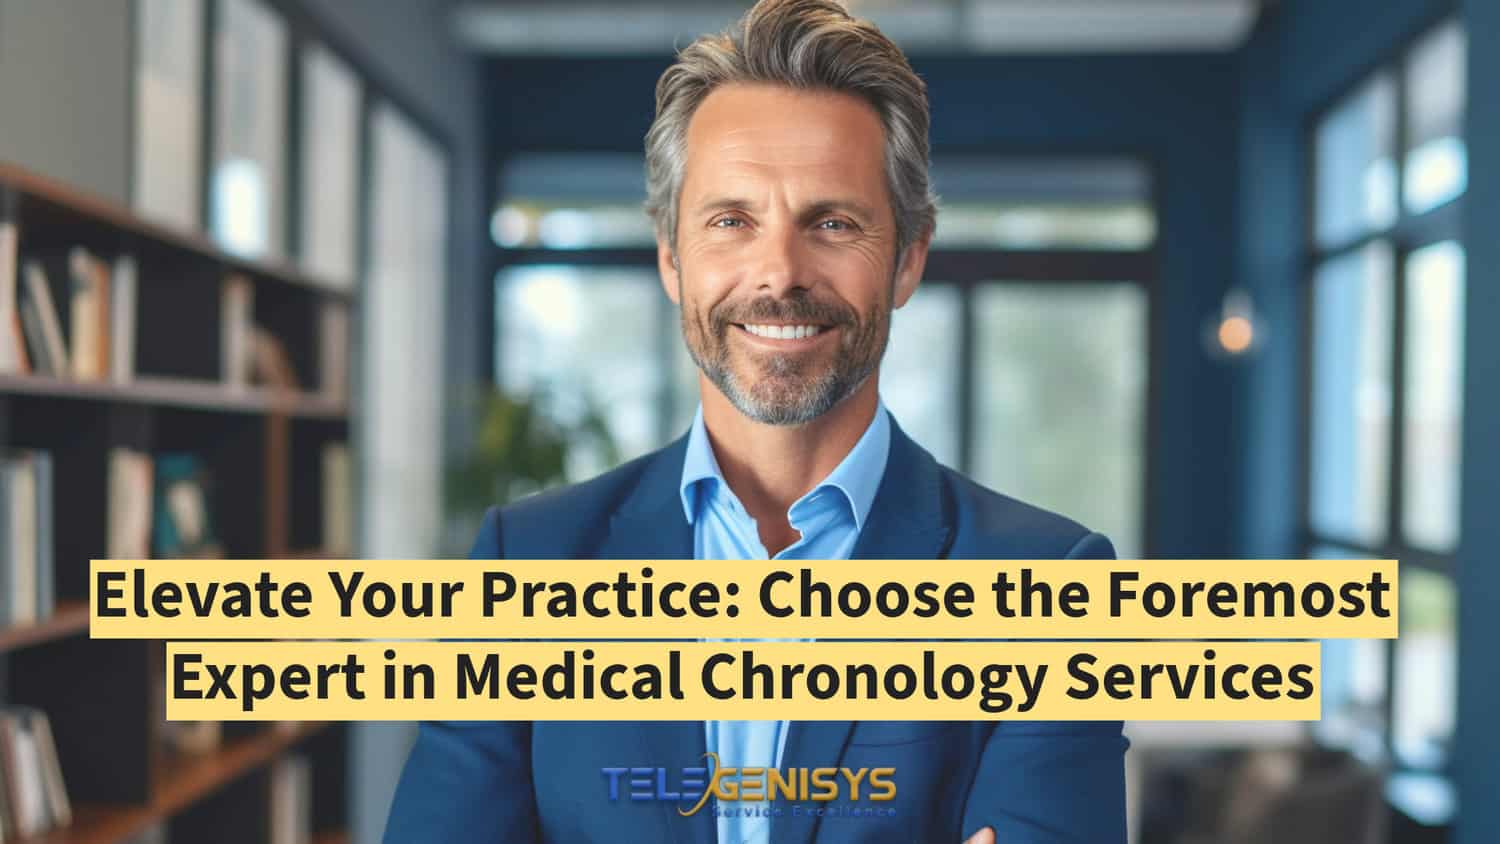 Elevate Your Practice: Choose the Foremost Expert in Medical Chronology Services